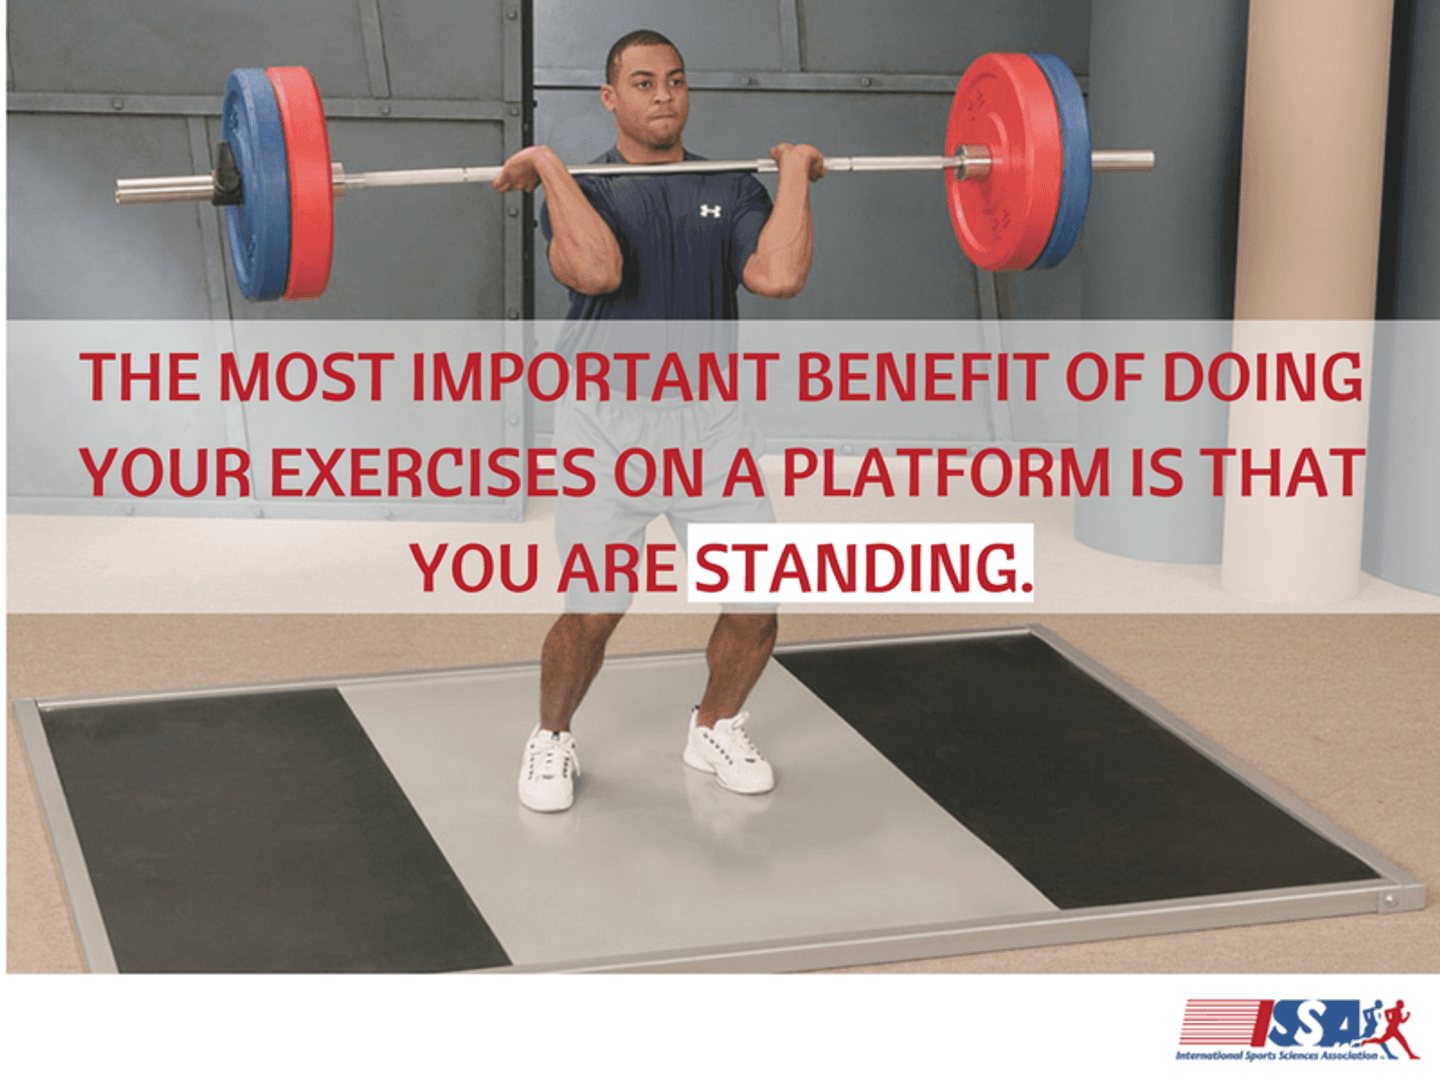 ISSA, International Sports Sciences Association, Certified Personal Trainer, ISSAonline,STAND and DELIVER!  The Lost Art and Science of Old School Weight Training, What's a platform?